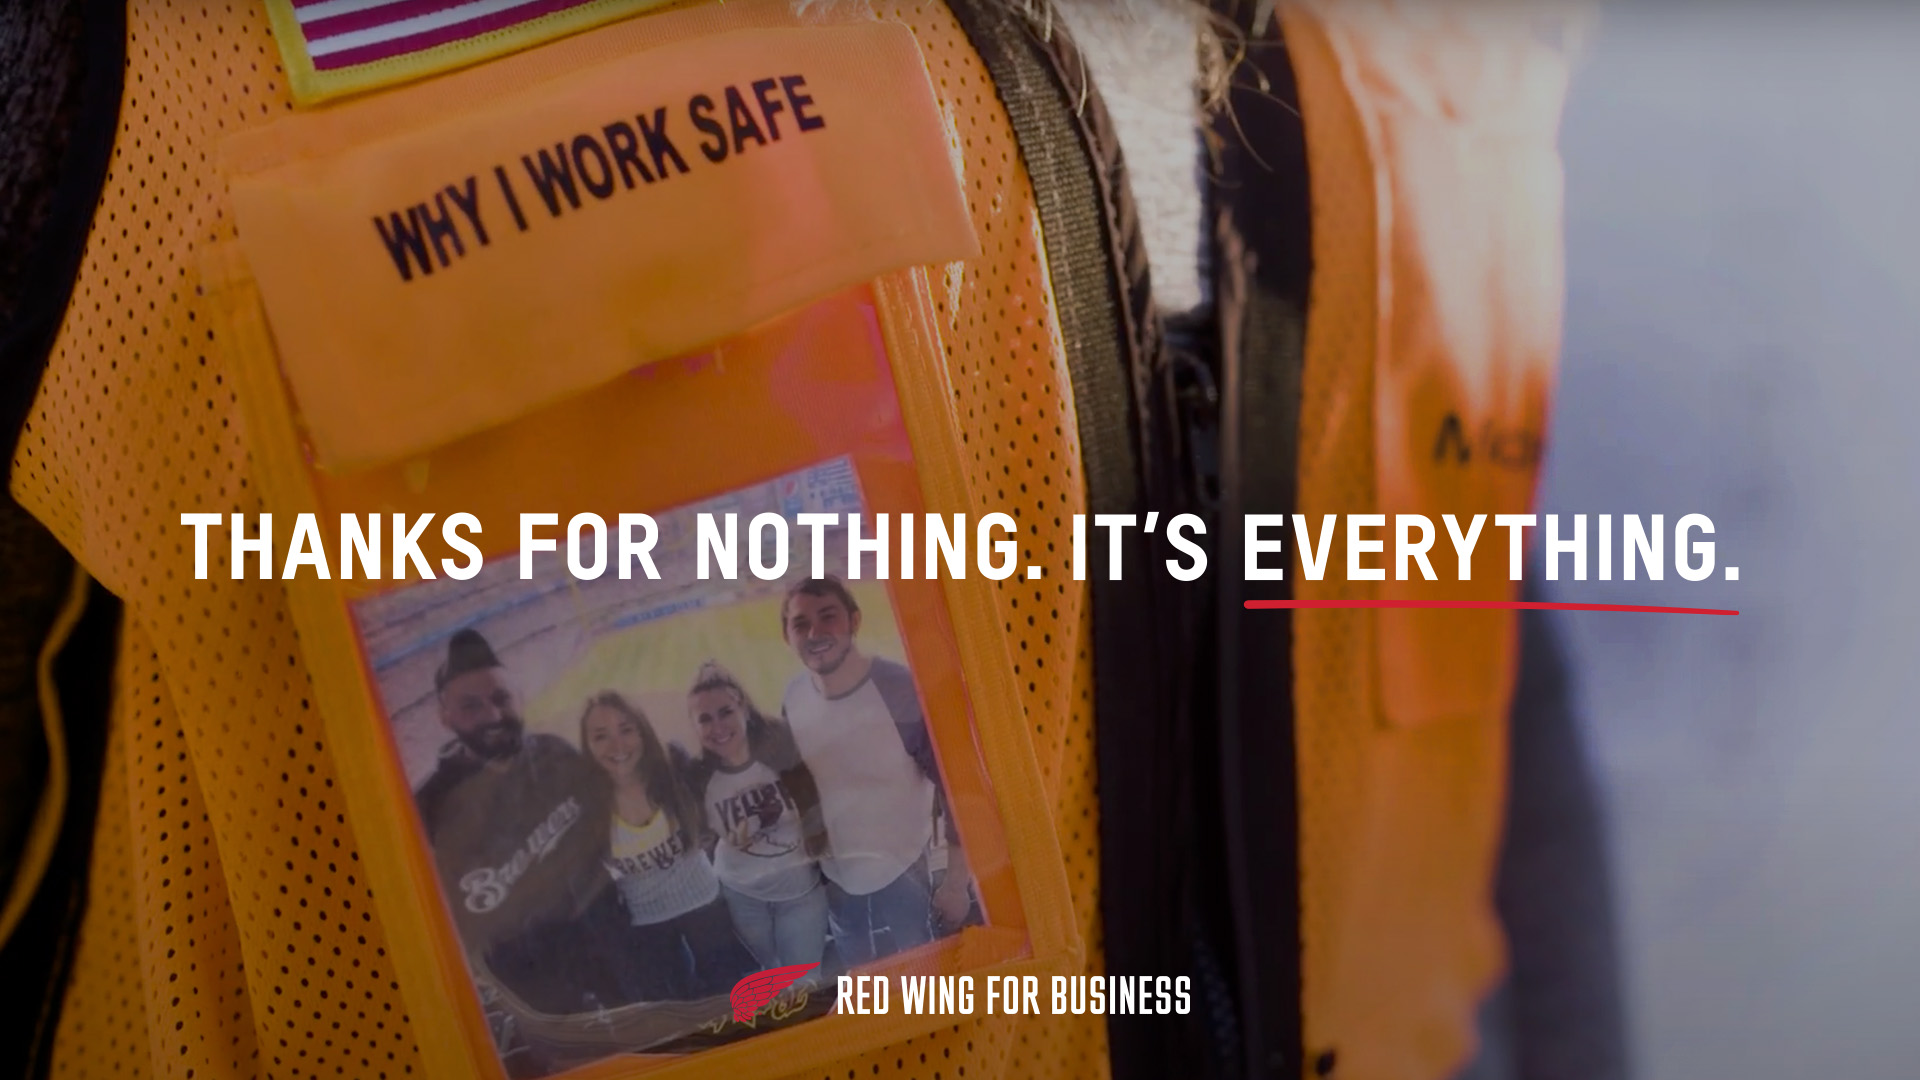 Why Red Wing Shoes Is Thanking Safety Professionals for ‘Nothing’